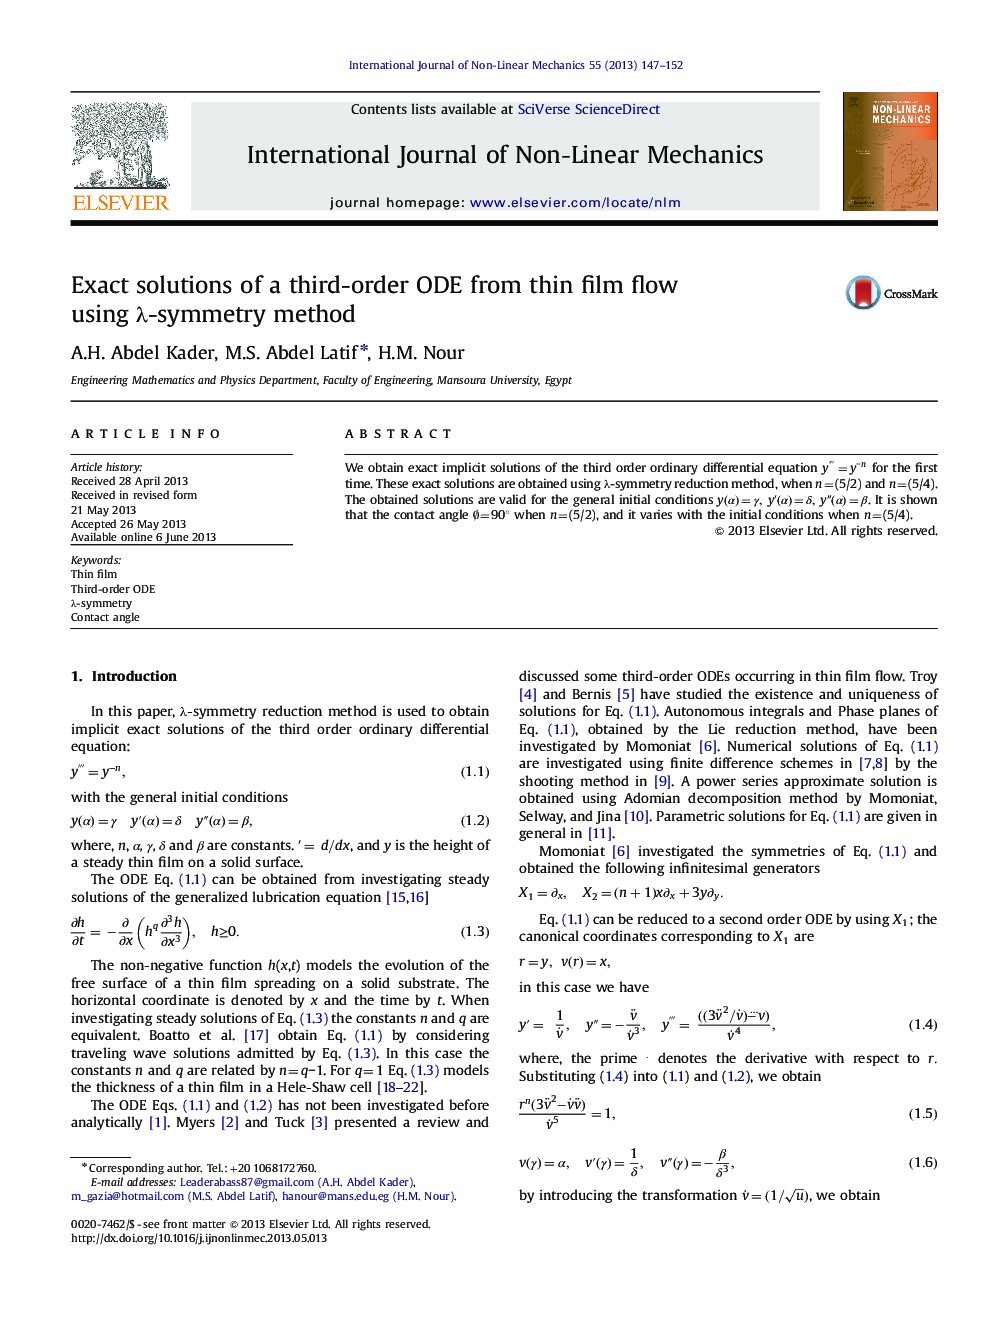 Exact solutions of a third-order ODE from thin film flow using λ-symmetry method